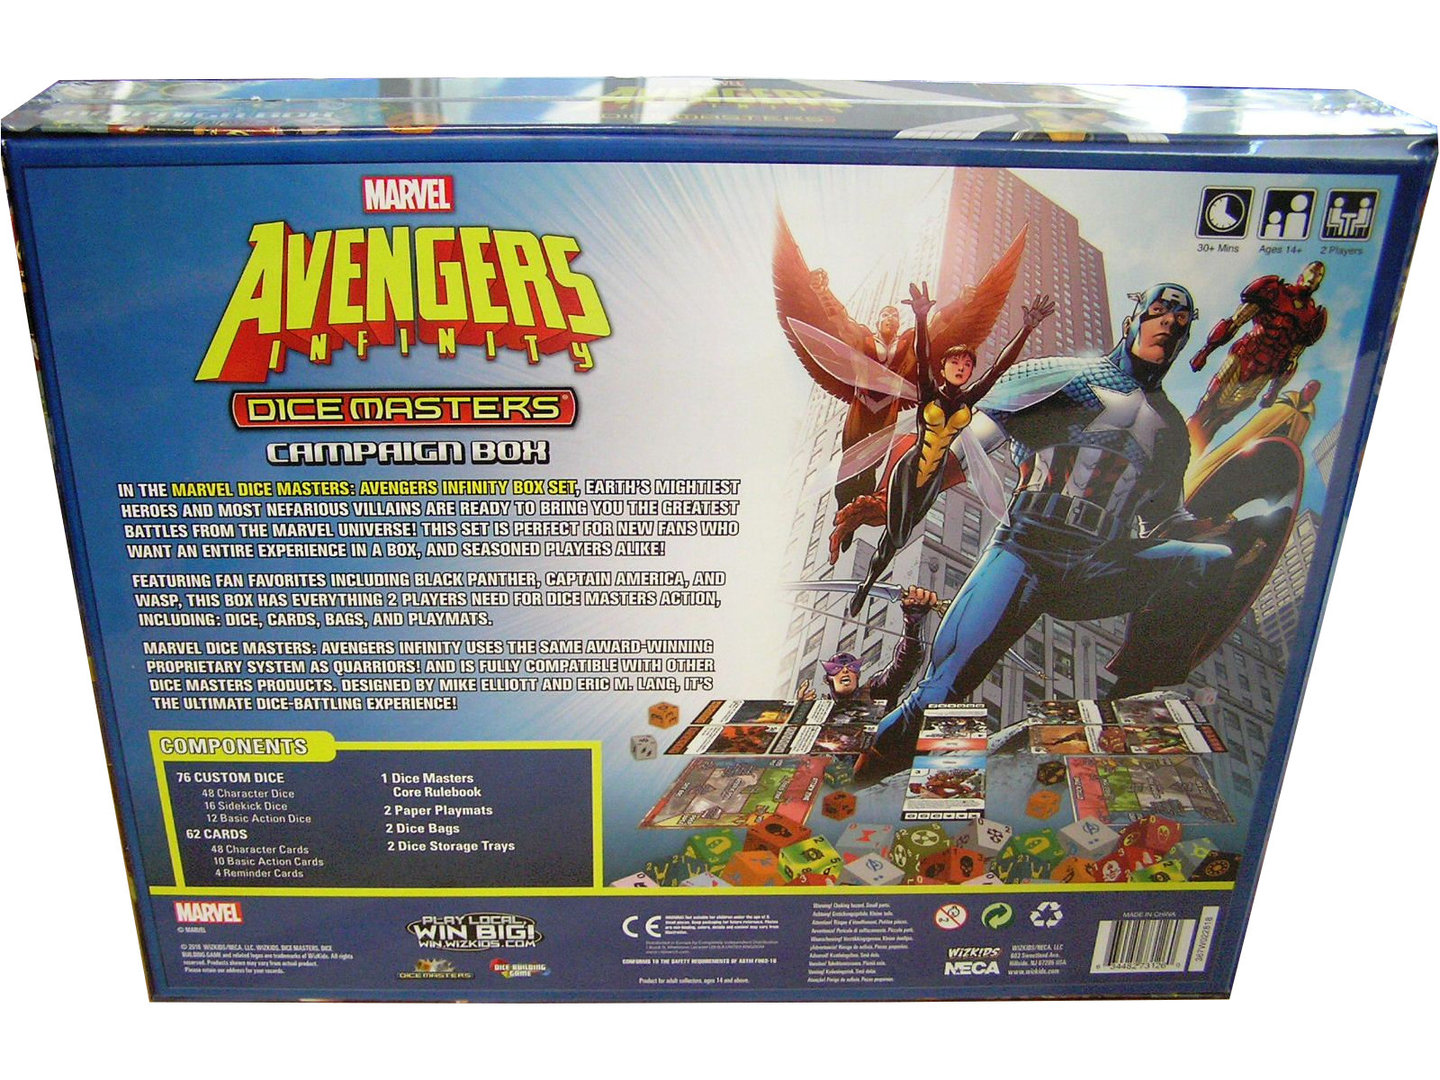 Dice Masters Avengers Infinity Campaign Box Set of Extra Character Dice MAX OUT